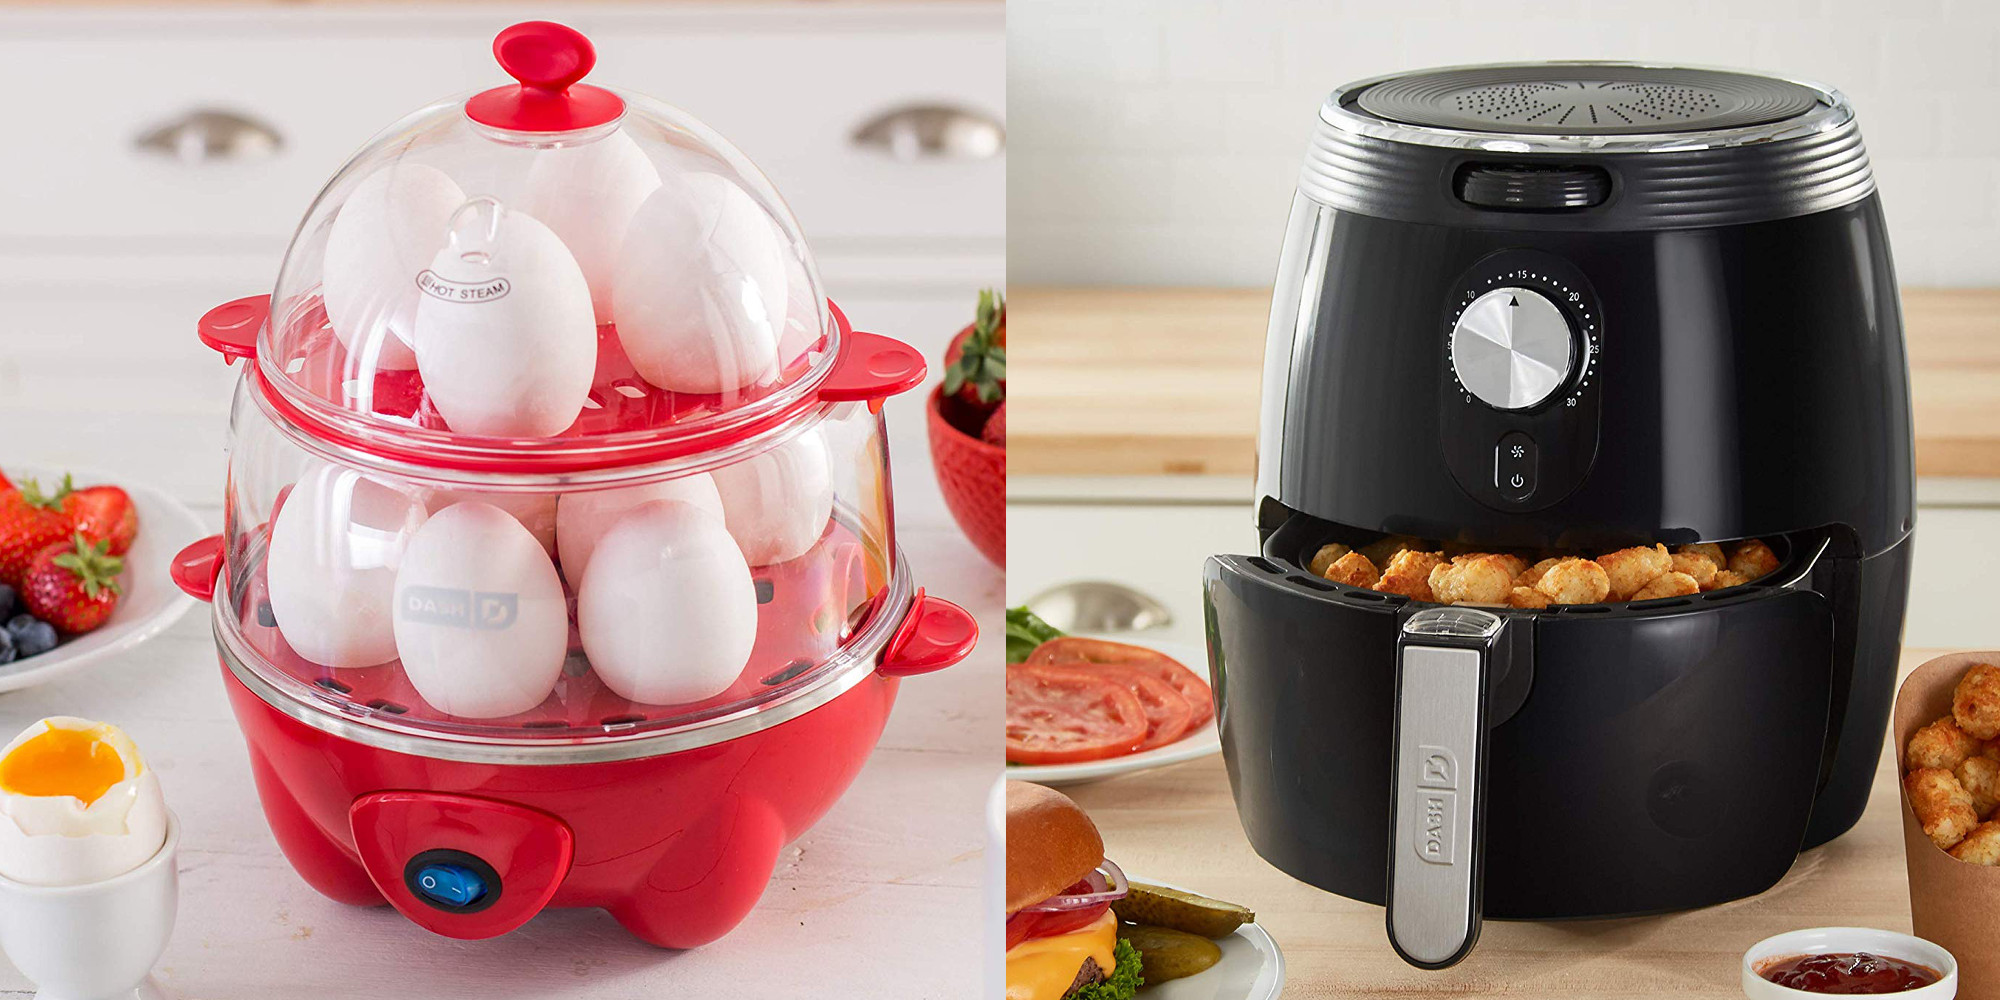 Best Black Friday 2019 Deals for the Home and Kitchen